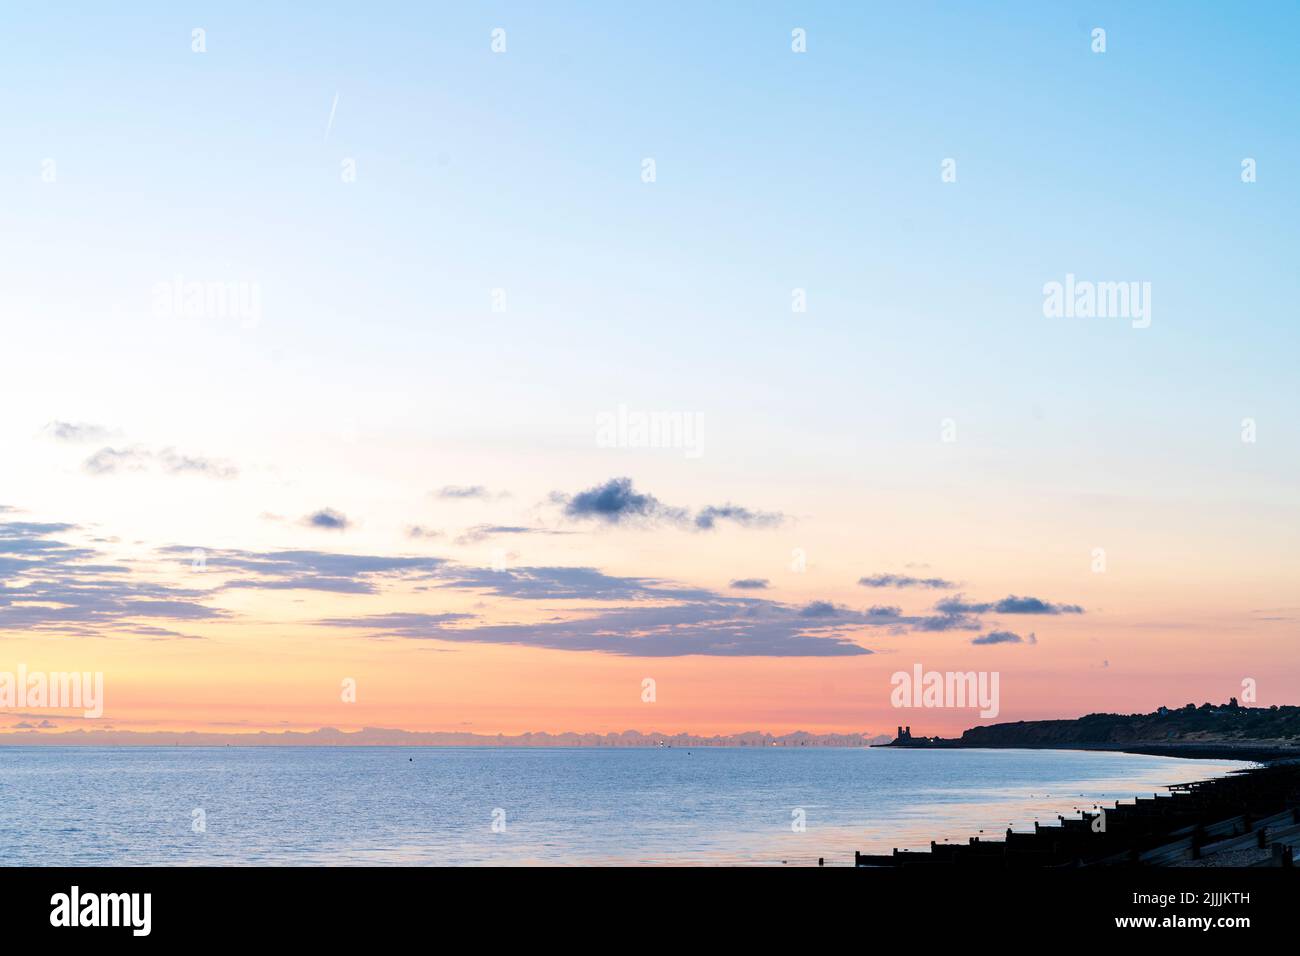 The dawn sky over the North Sea seen from the Kent coast at Herne Bay. Silhouette of some breakwaters, groynes in the foreground and the wide bay ending at the landmark twin towers of the ruins of Reculver church in the distance. Some scattered clouds in the sky. Stock Photo